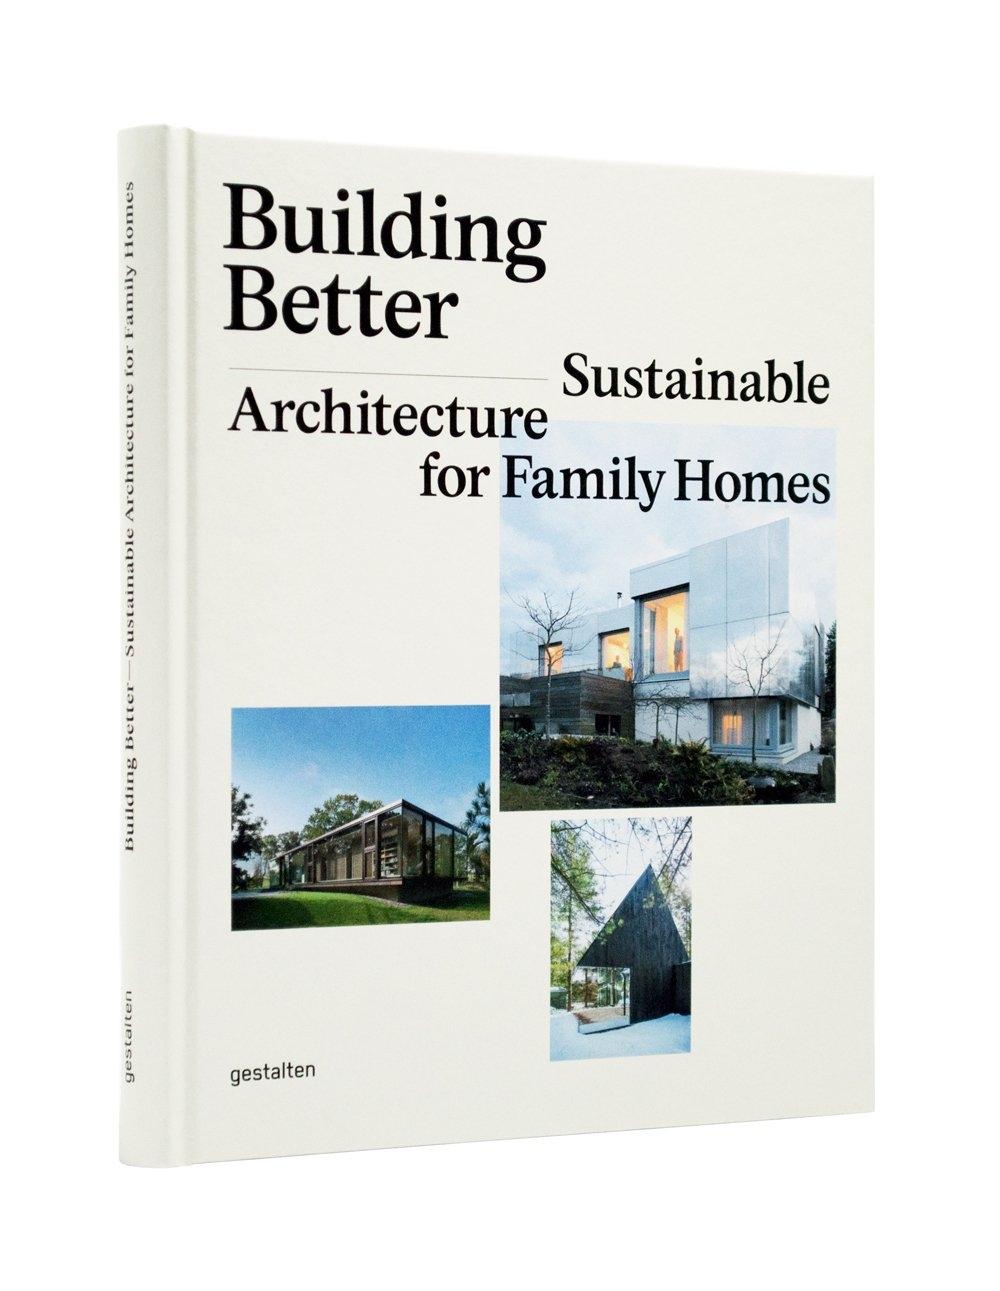 BUILDING BETTER. SUSTAINABLE ARCHITECTURE FOR FAMILY HOMES